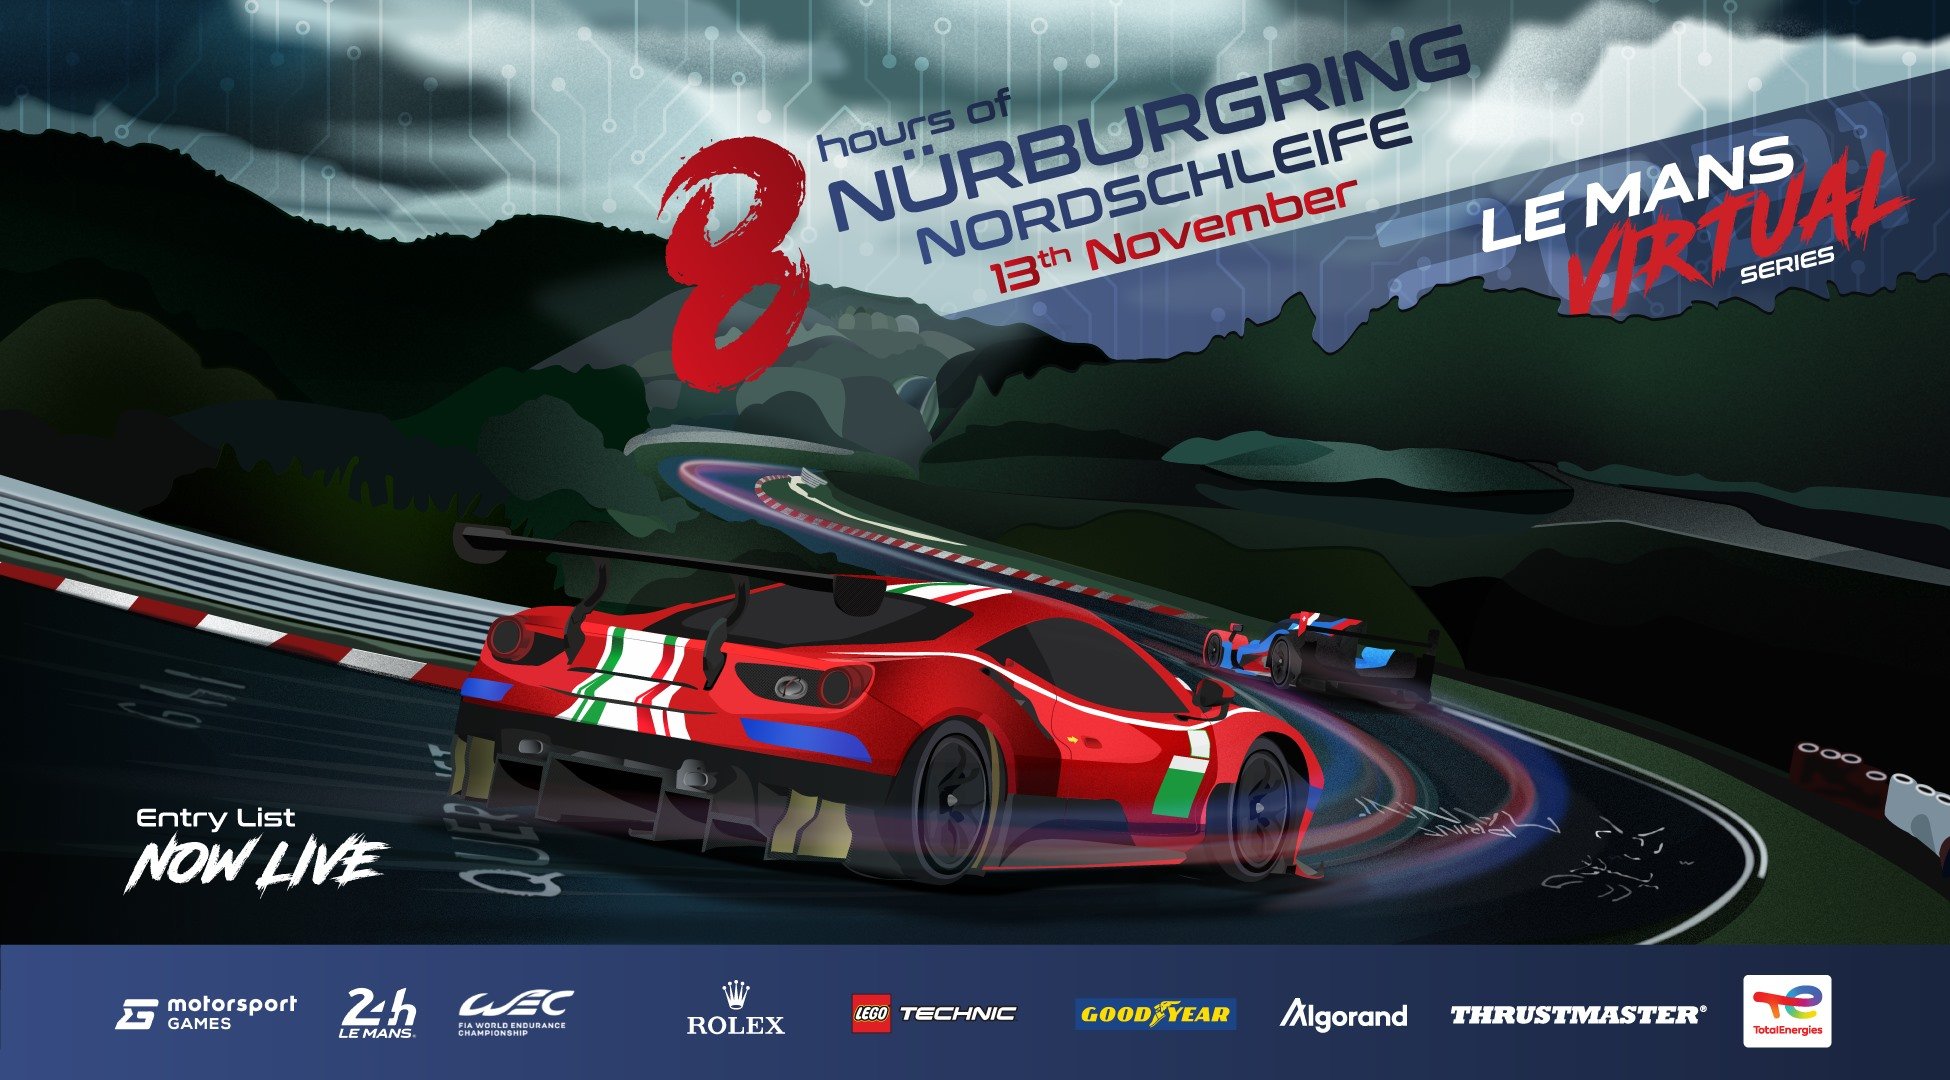 More information about "Le Mans Virtual Series: Round 3 Nürburgring Nordschleife [13 Novembre ore 13,30]"